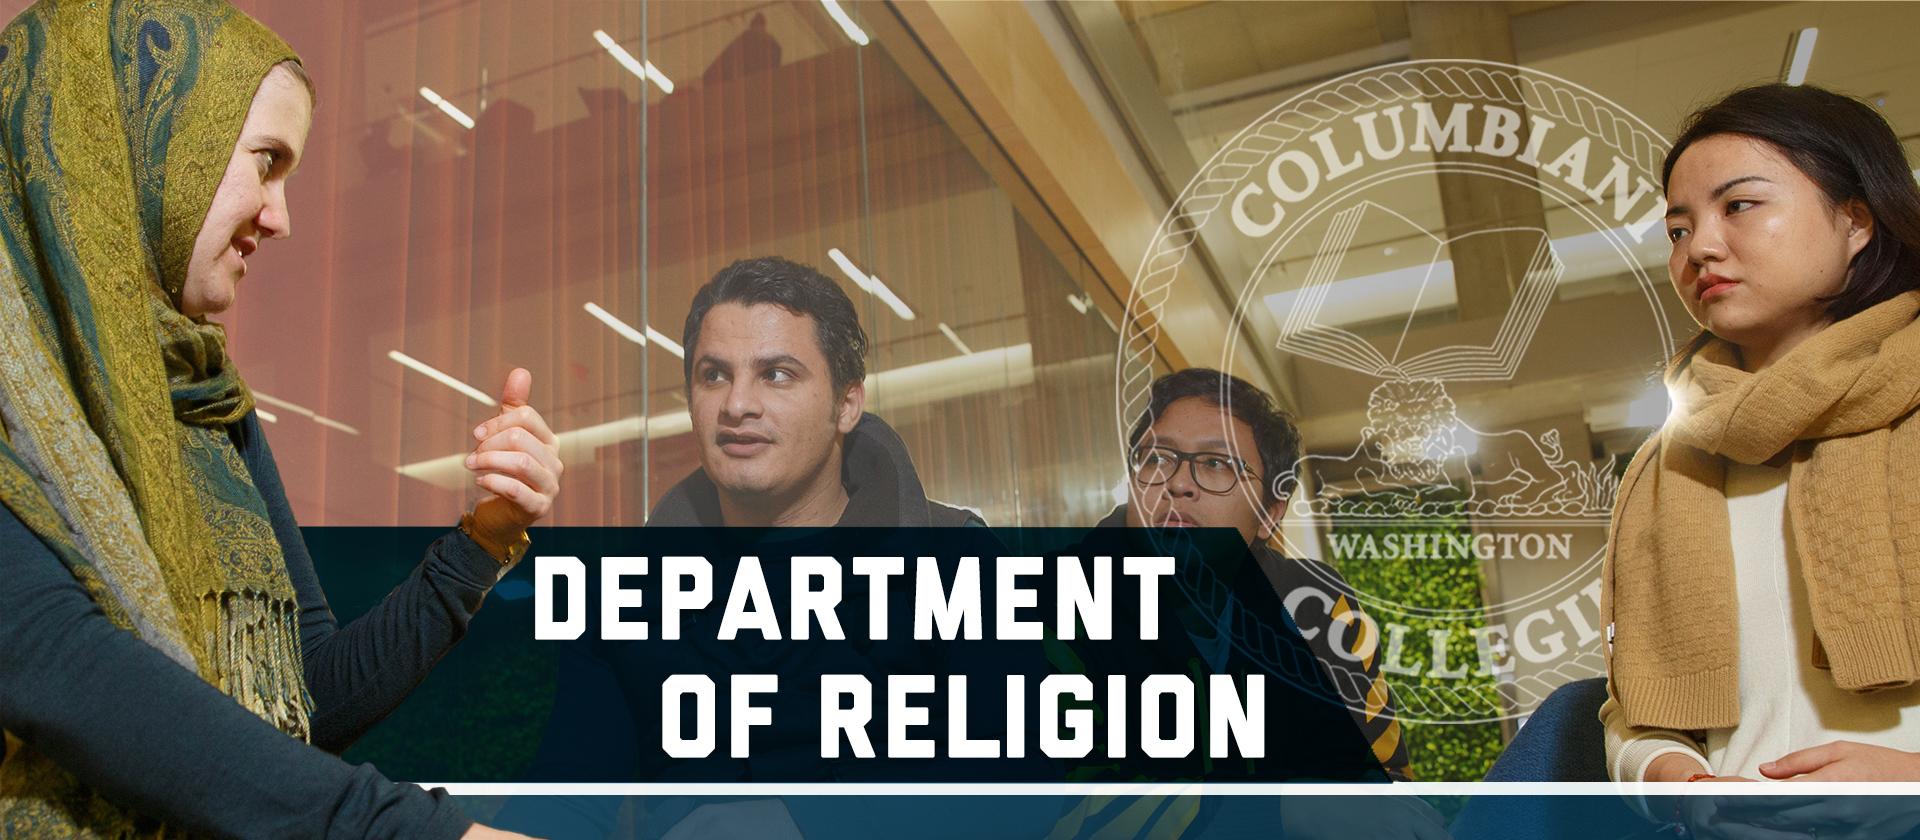 Columbian College Department of Religion. A group of four students talking